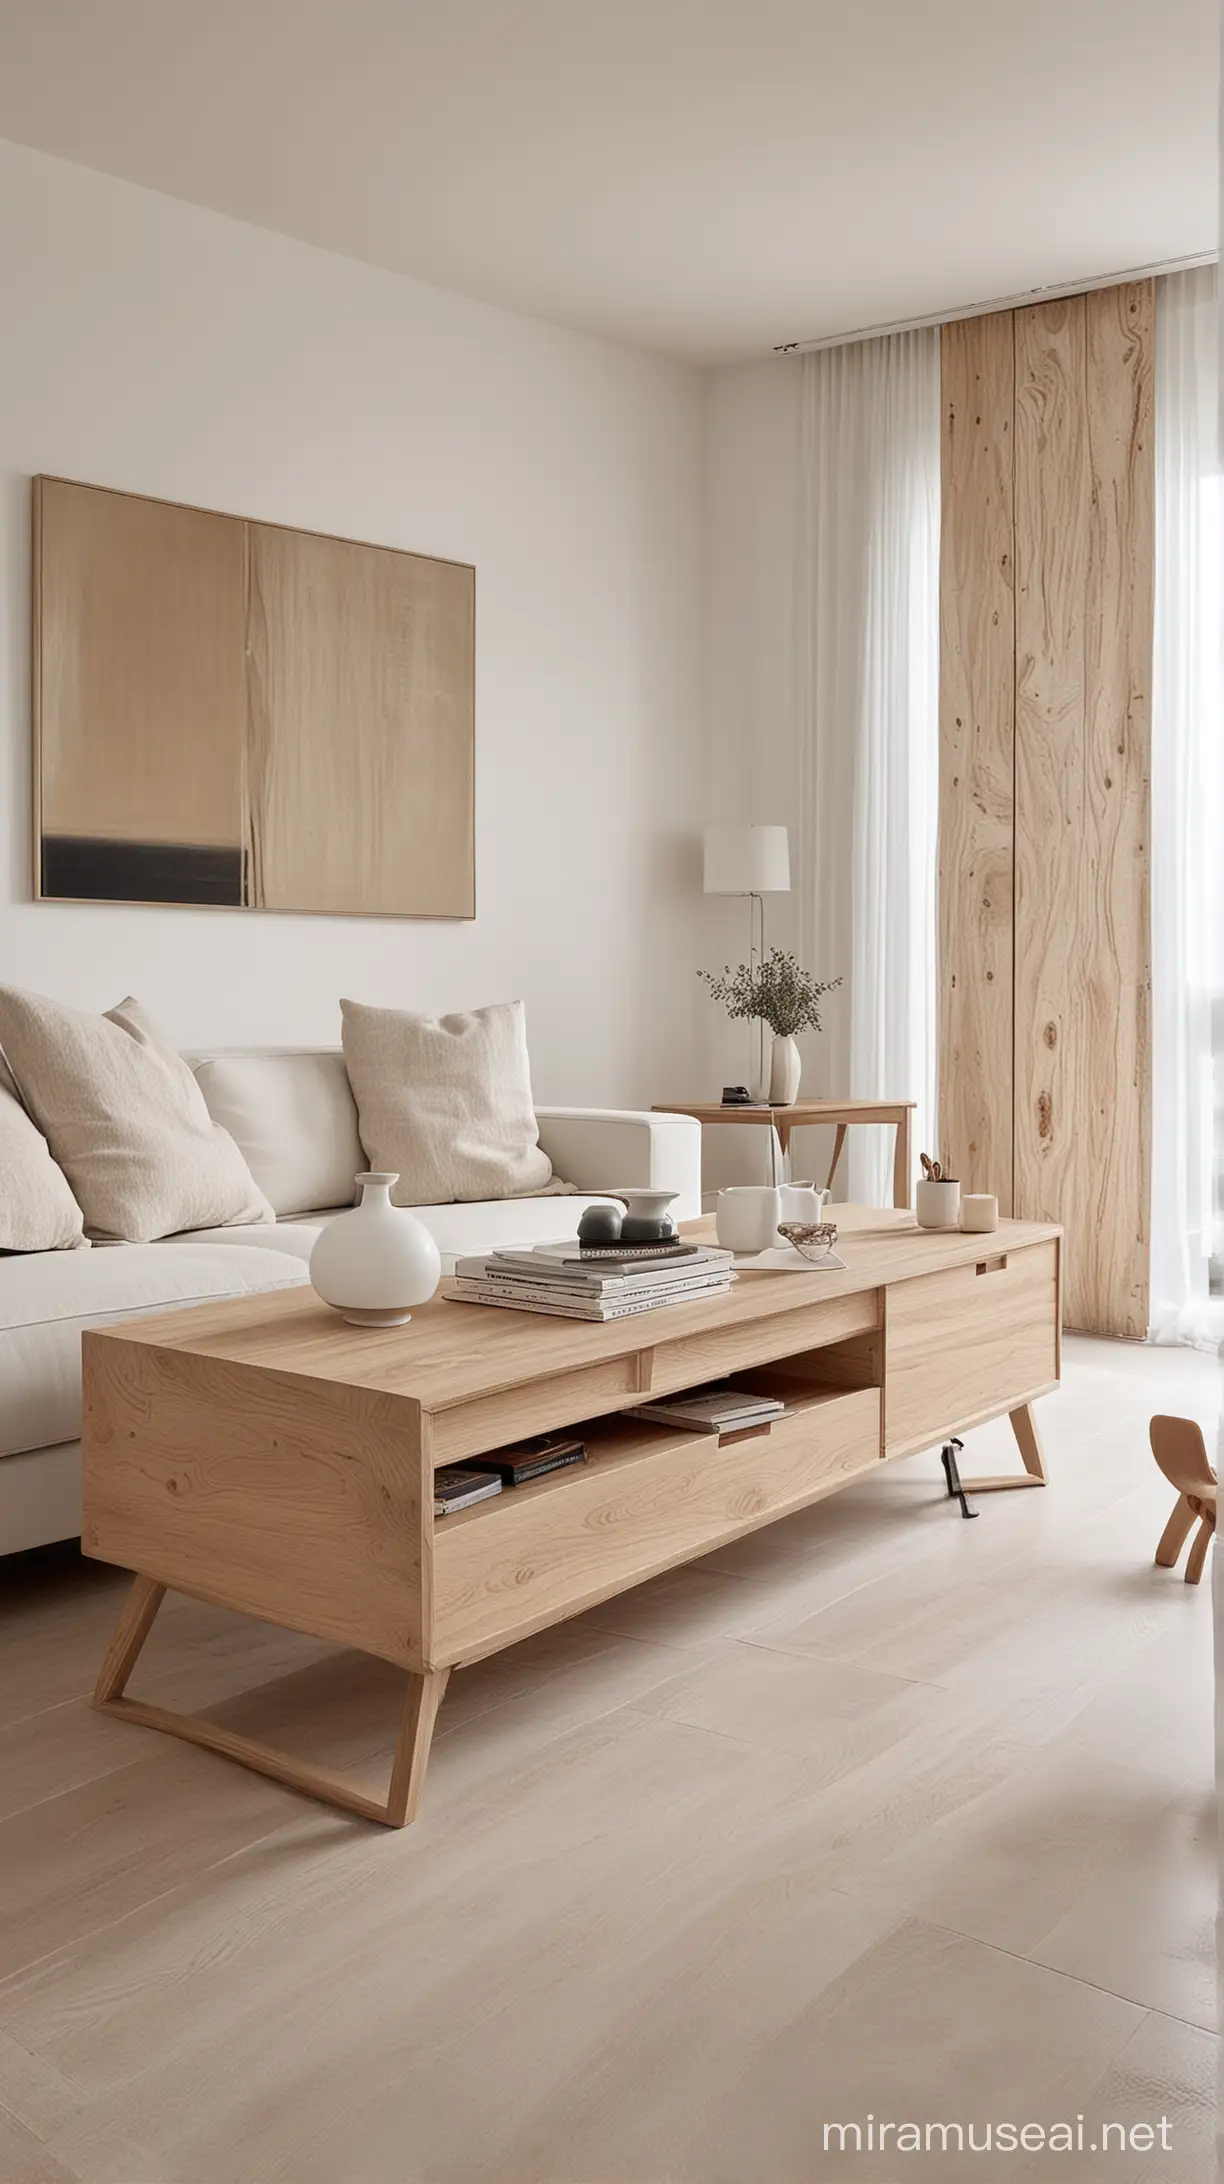 Modern Interior Design with White and Wood Tones